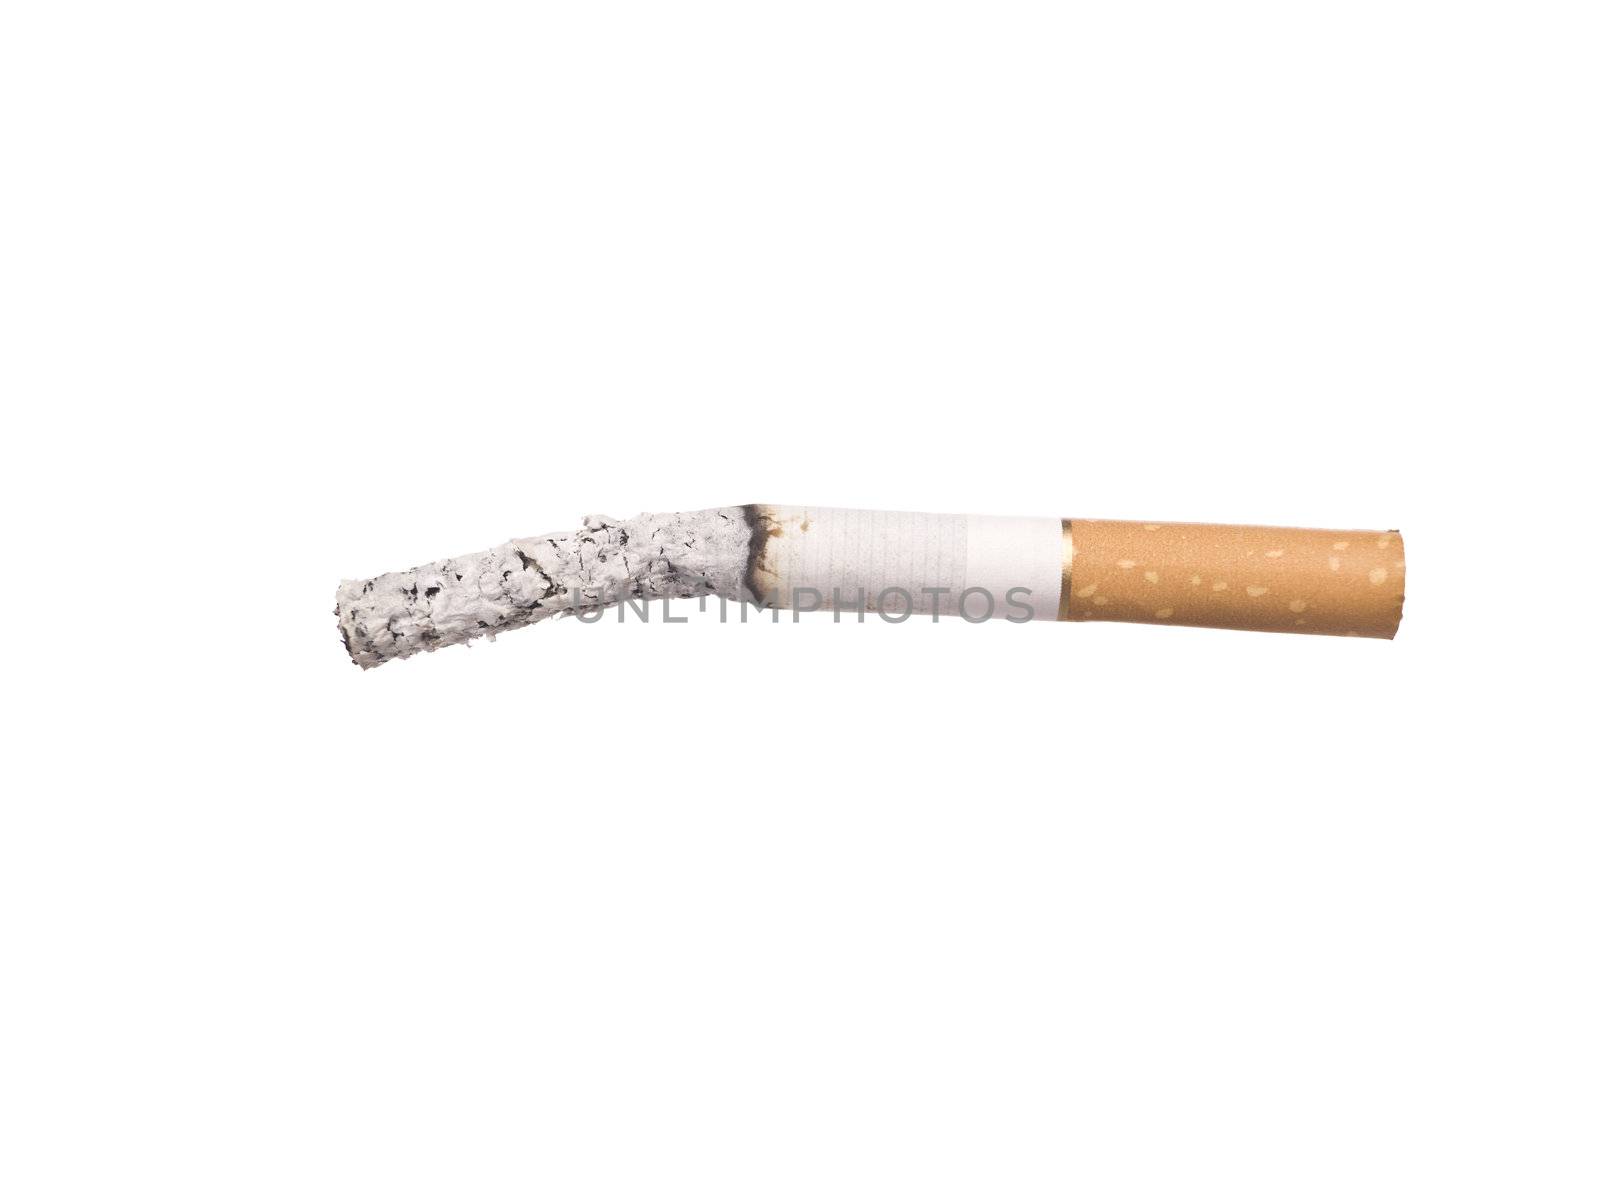 Lit cigarrette with ashes isolated on a white background